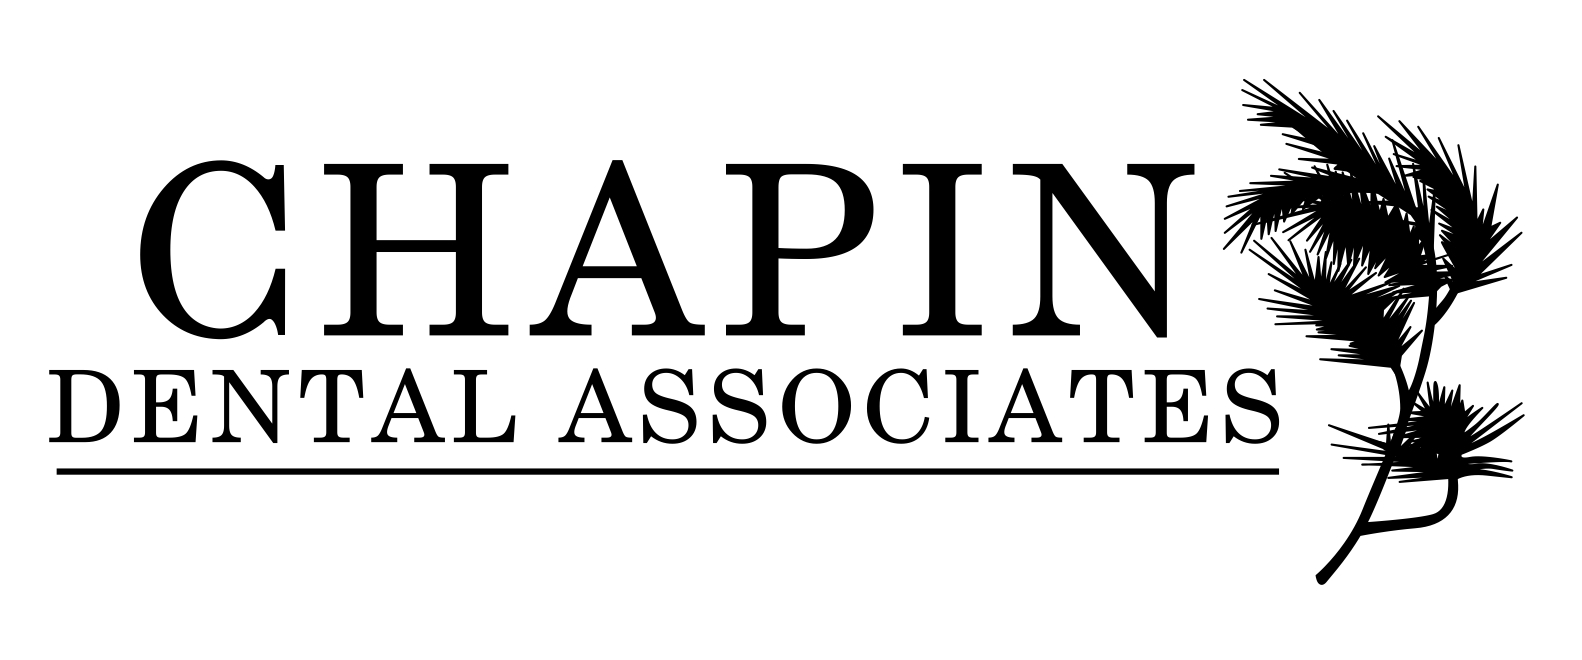 Link to Chapin Dental Associates home page